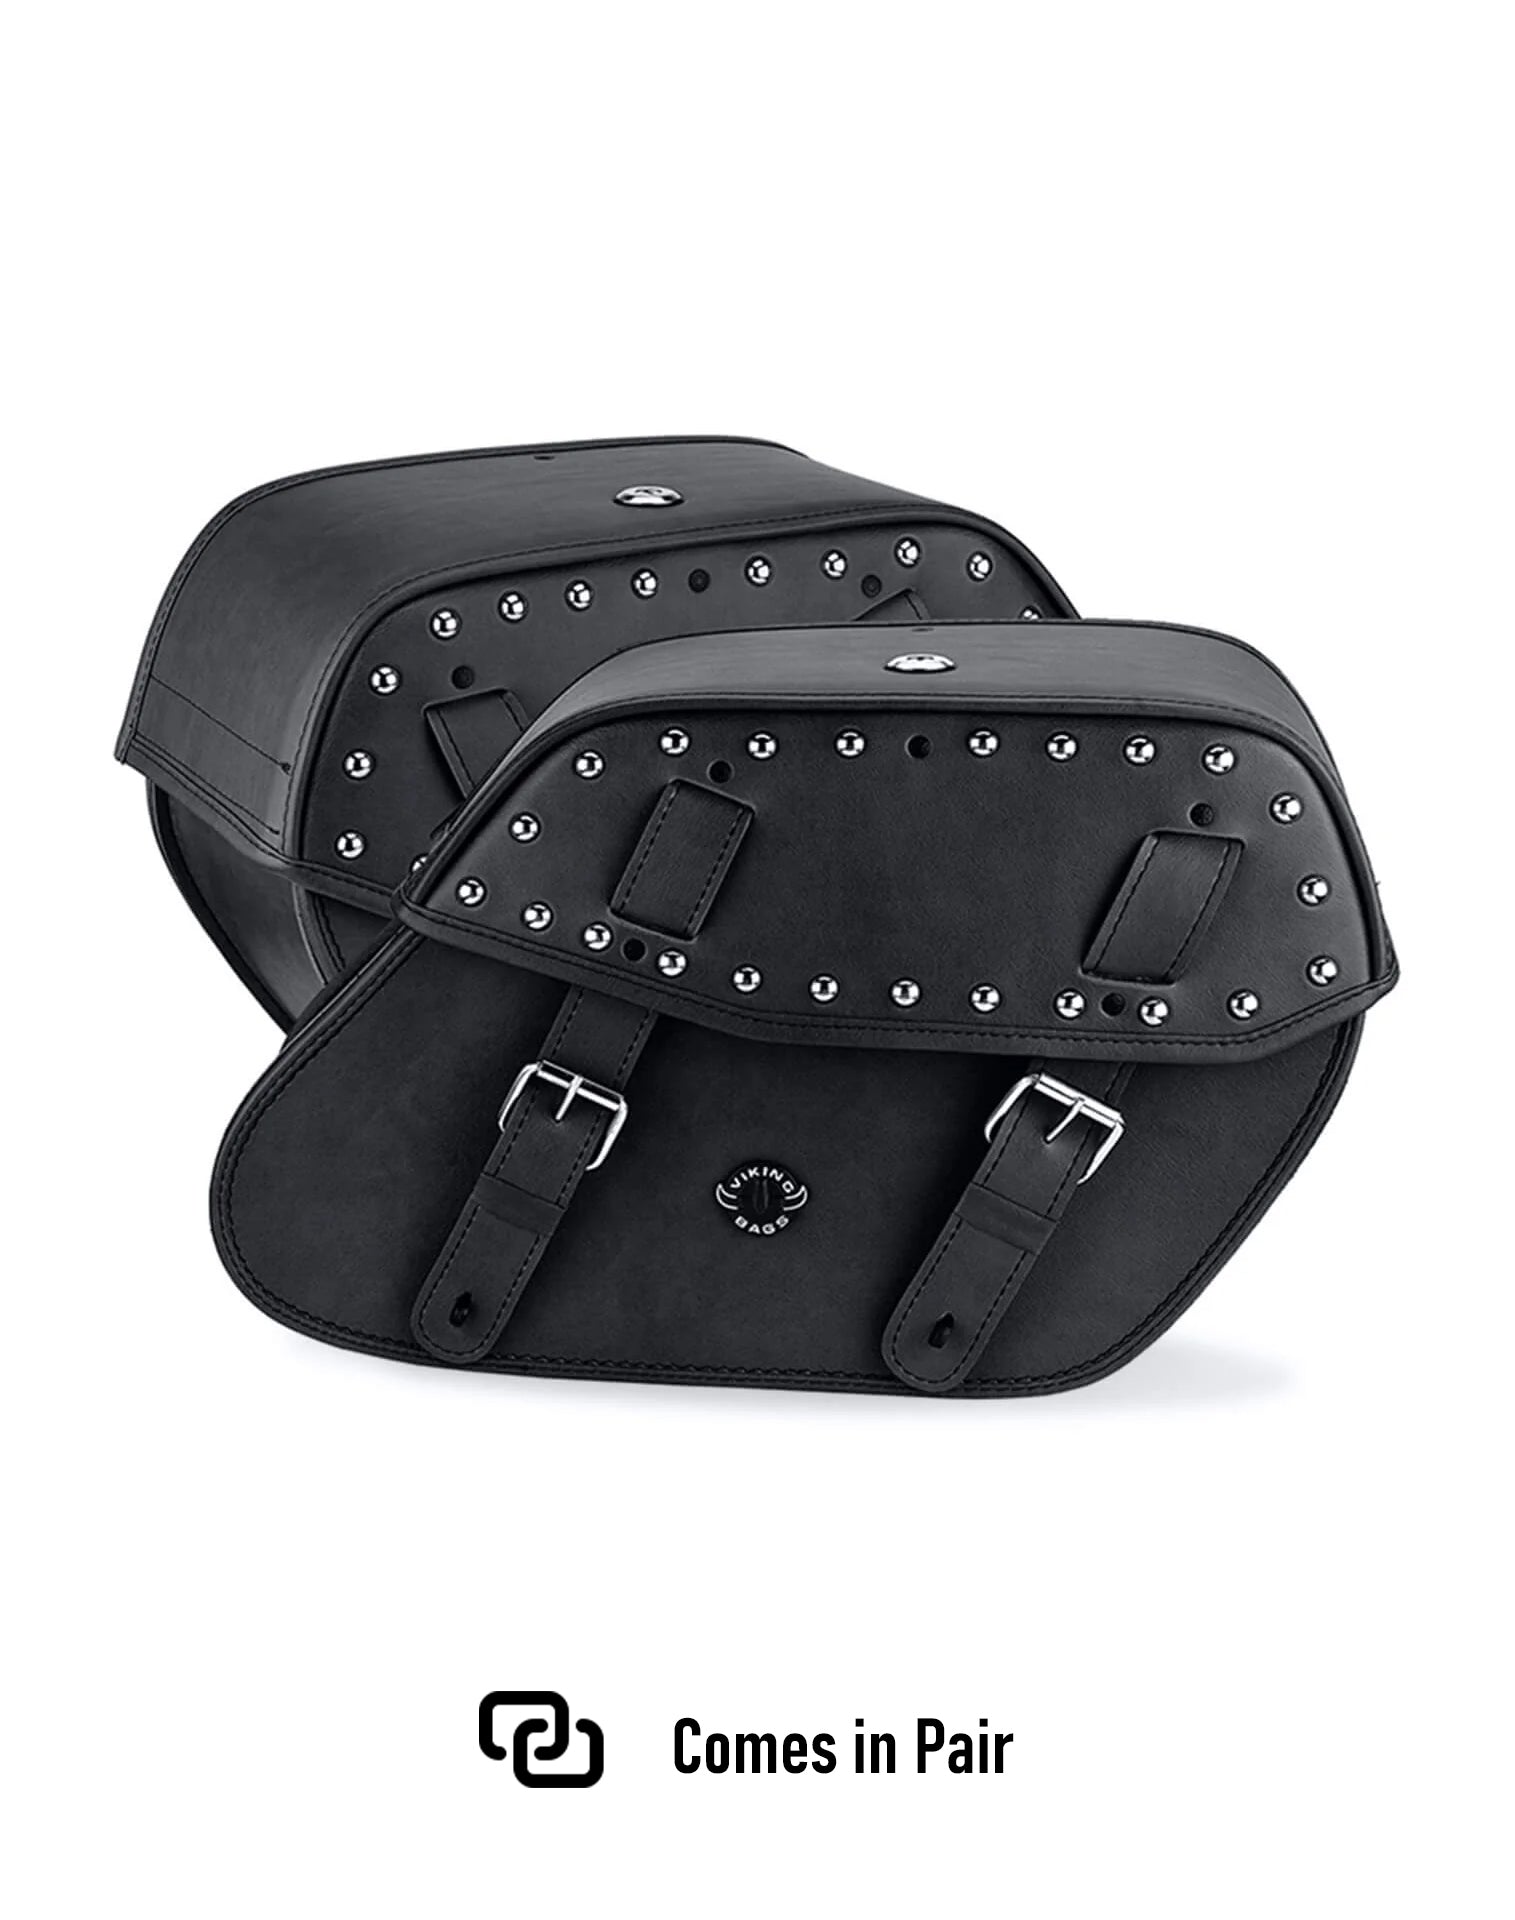 Viking Odin Large Studded Leather Motorcycle Saddlebags For Harley Softail Cross Bones Flstsb Weather Resistant Bags Comes in Pair